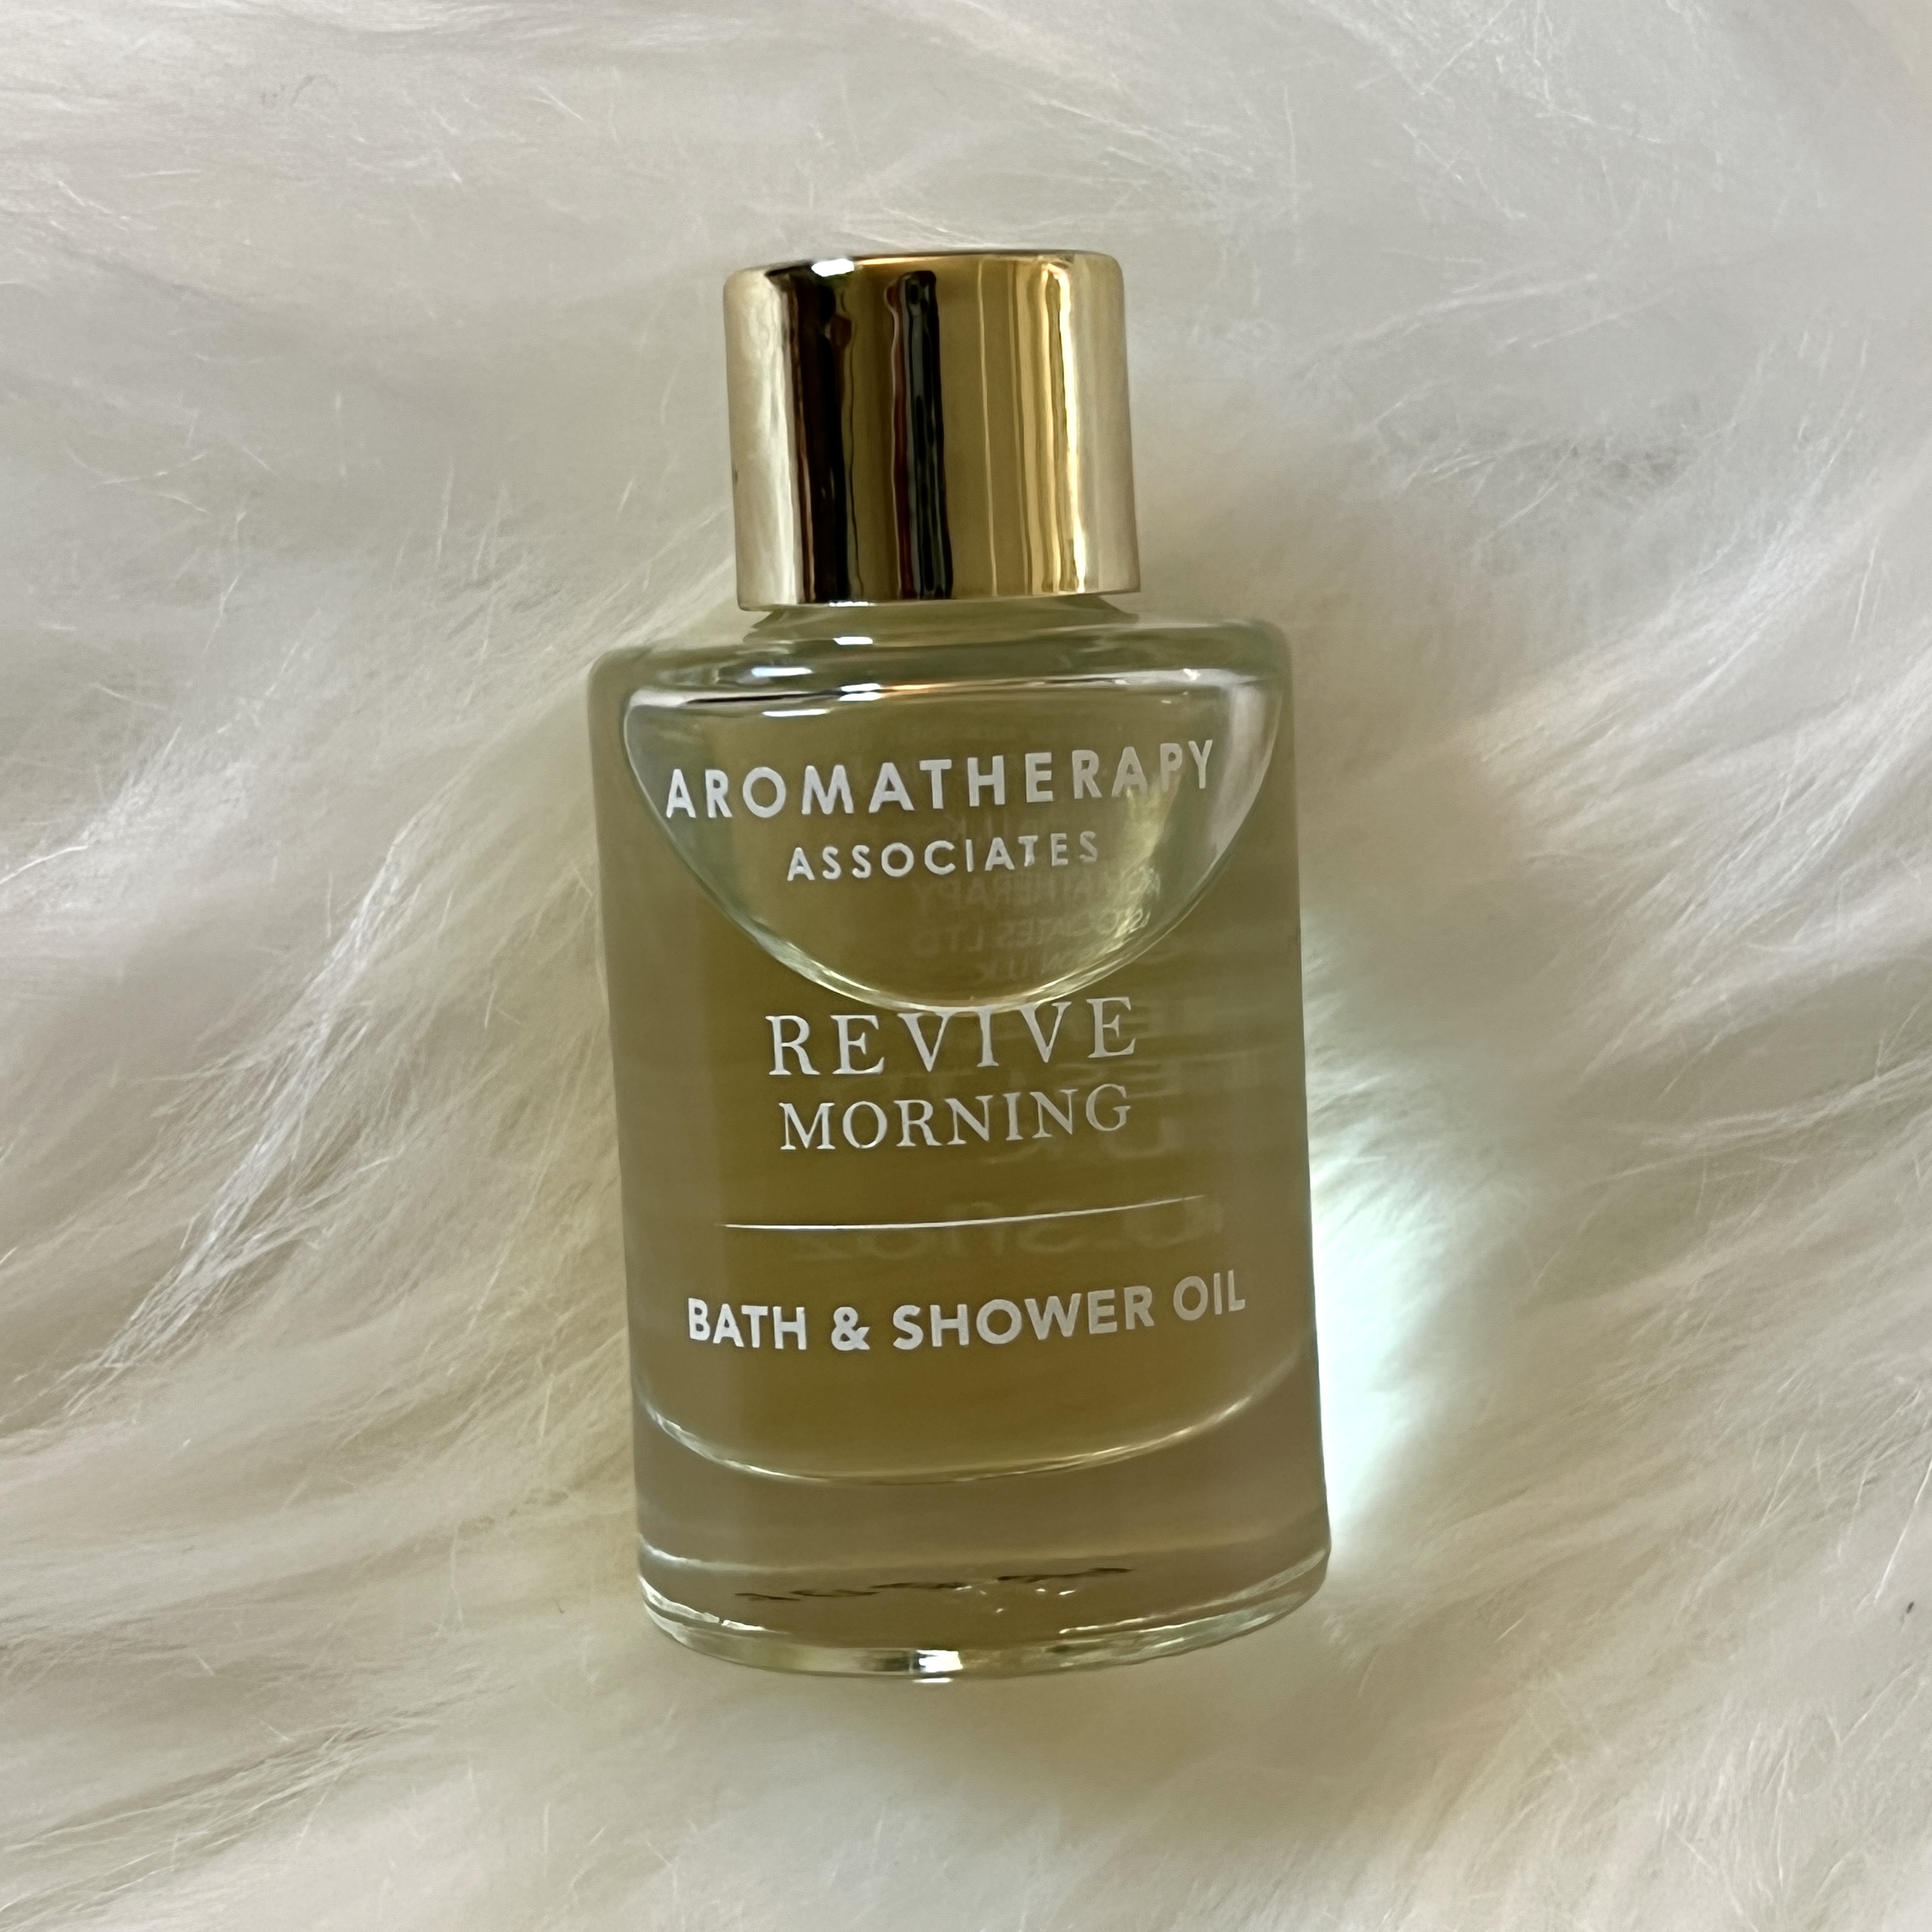 Front of Aromatherapy Associates Body Oil for GlossyBox x Flat Lay Co. Limited Edition